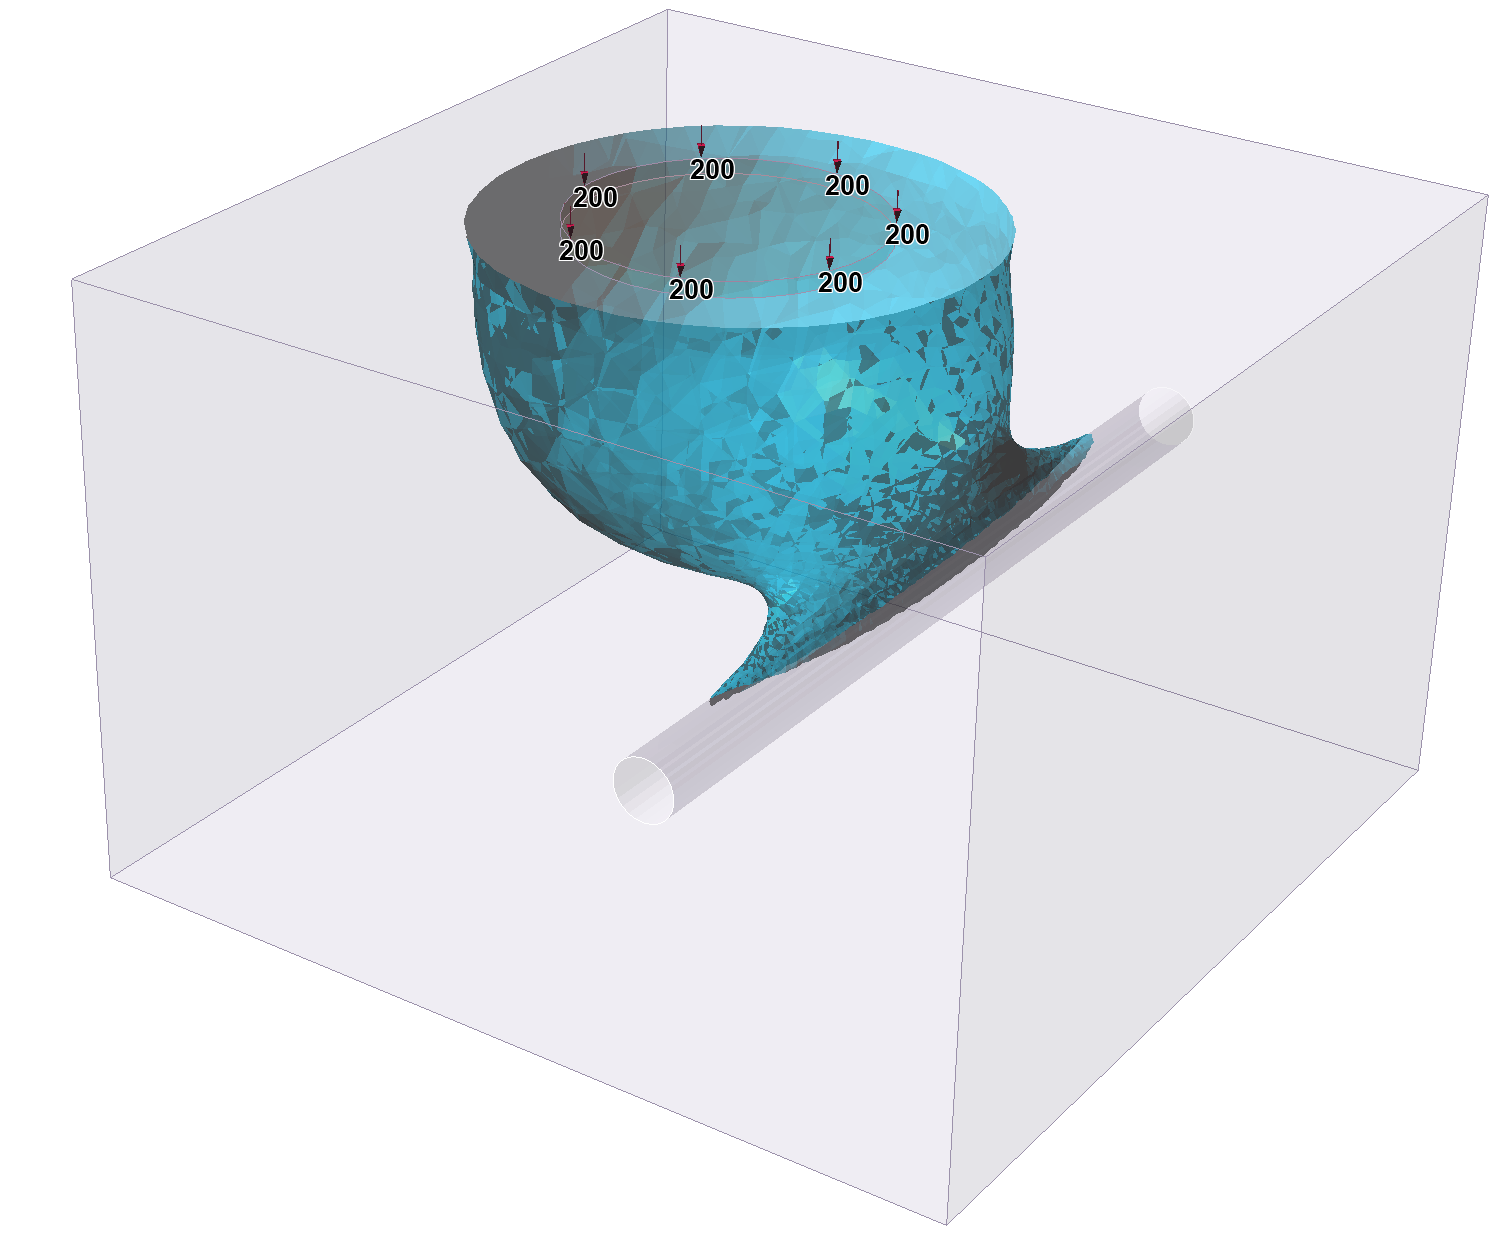 Isosurface for a total displacement of 0.015 m